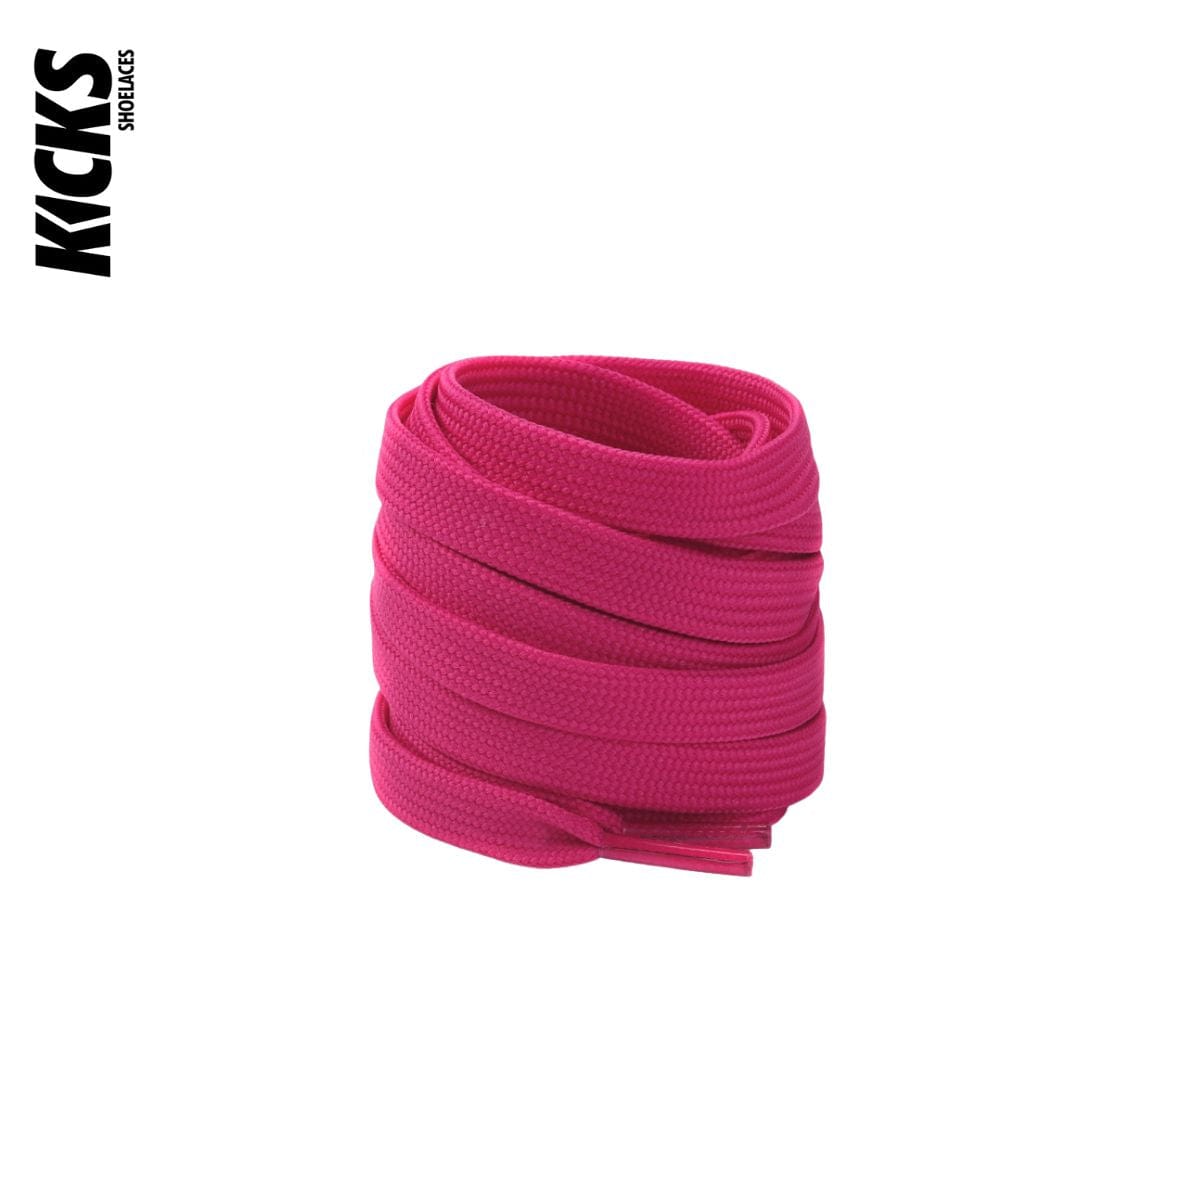 Rose Pink Replacement Shoe Laces for Adidas NMD Sneakers by Kicks Shoelaces